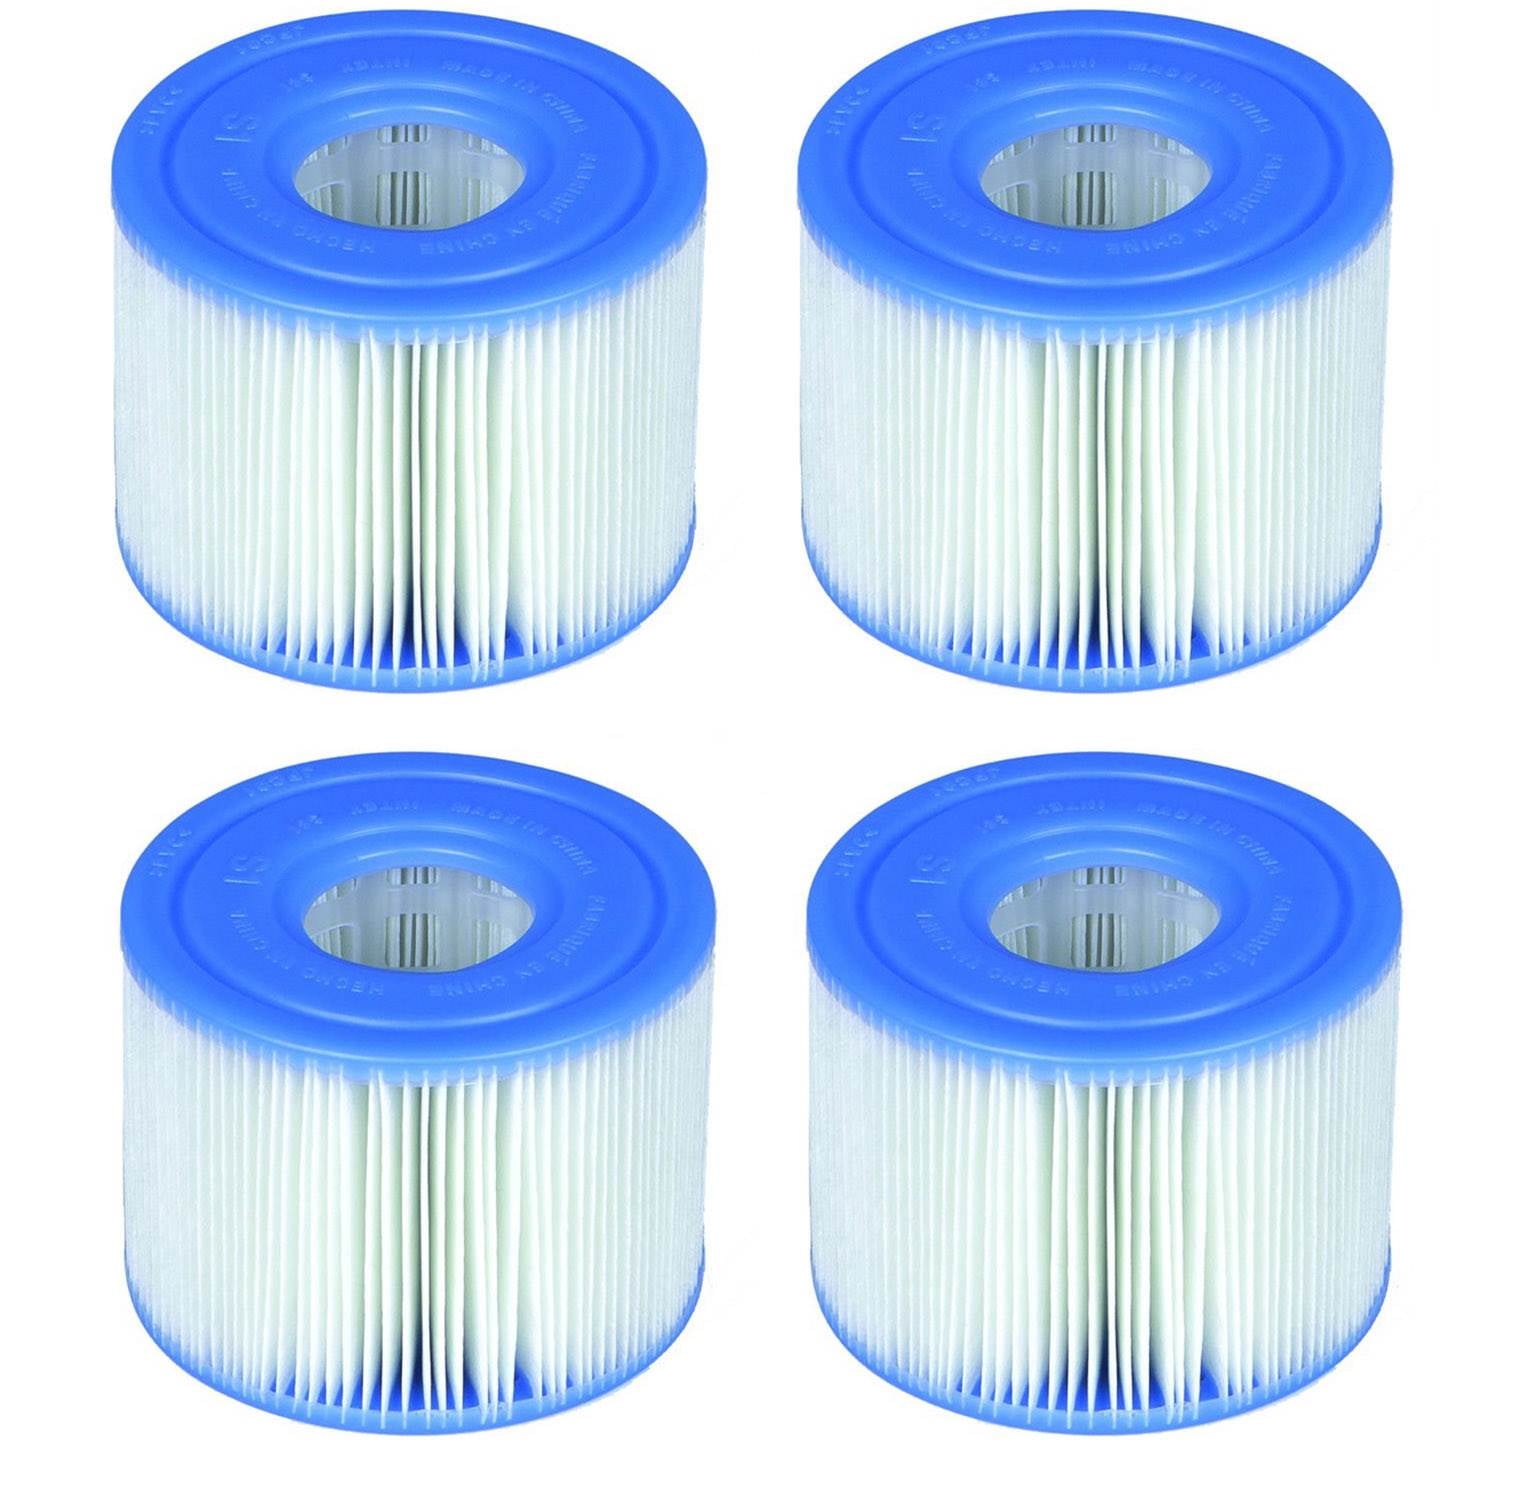 12 Pack Type S1 Filter Compatible with Intex 29001E Spa Filters Cartridge Type S1 Filter Cartridge Replacement Compatible with All INTEX PureSpa Hot Tub Models SPRODUCE Type S1 Spa Filter 